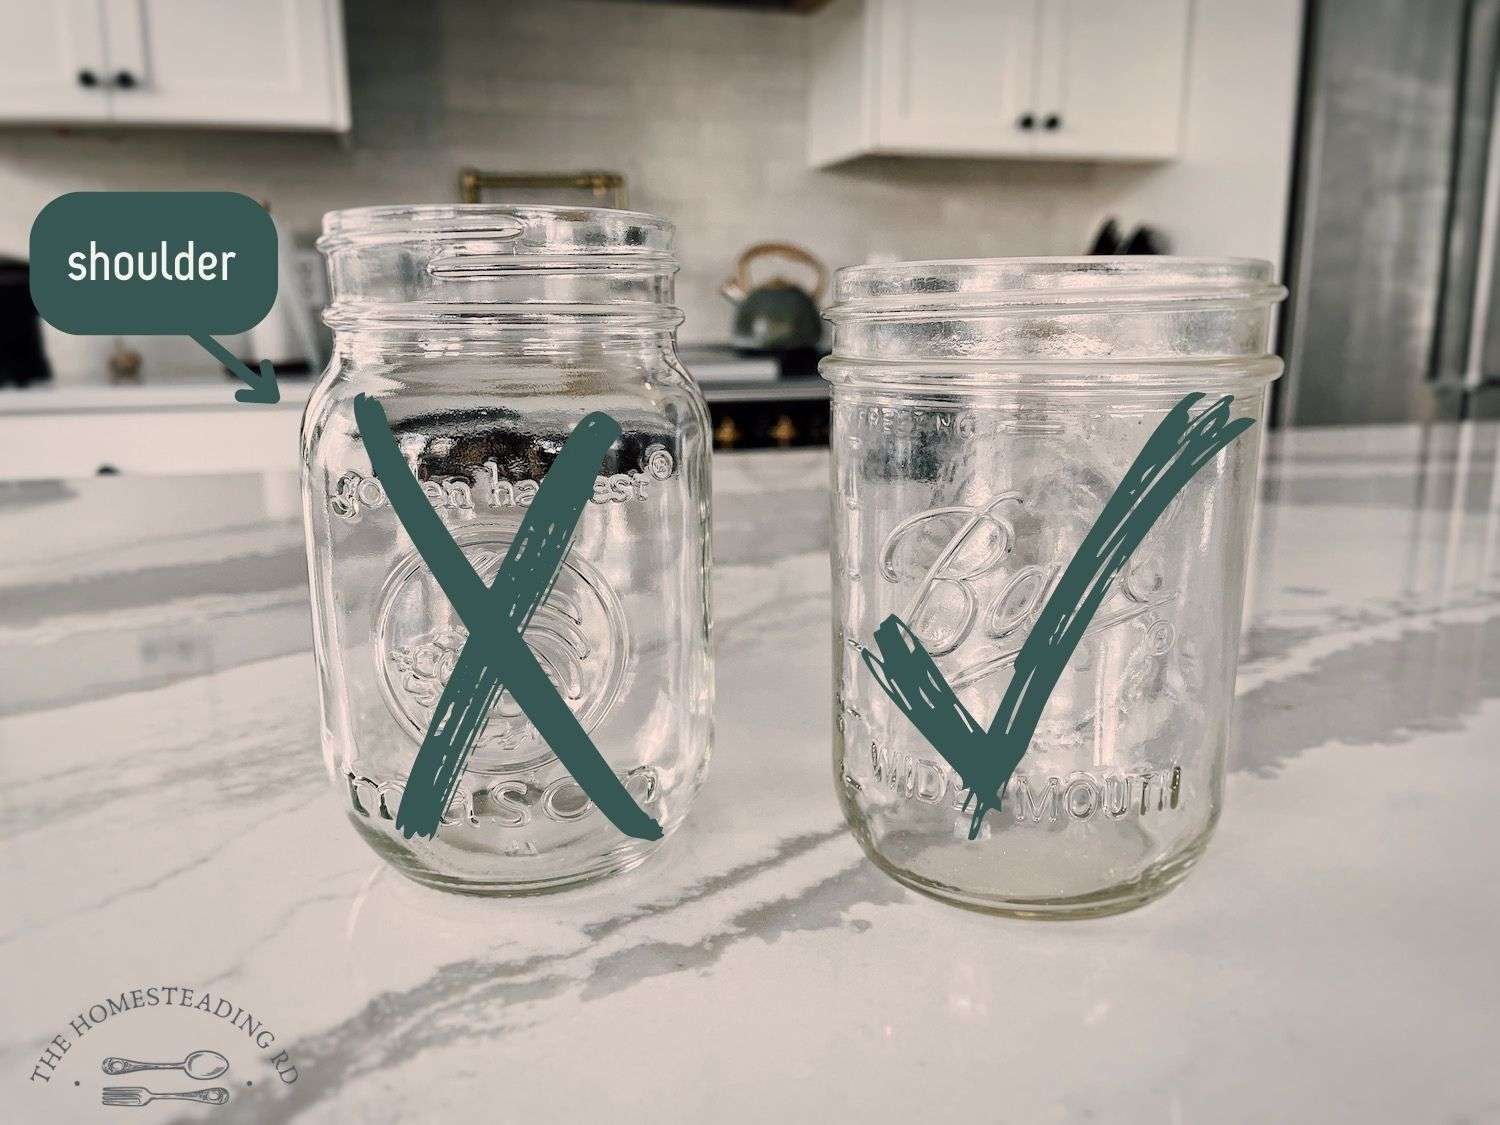 A regular mouth mason jar (with an x mark) next to a wide mouth mason jar (with a check mark)